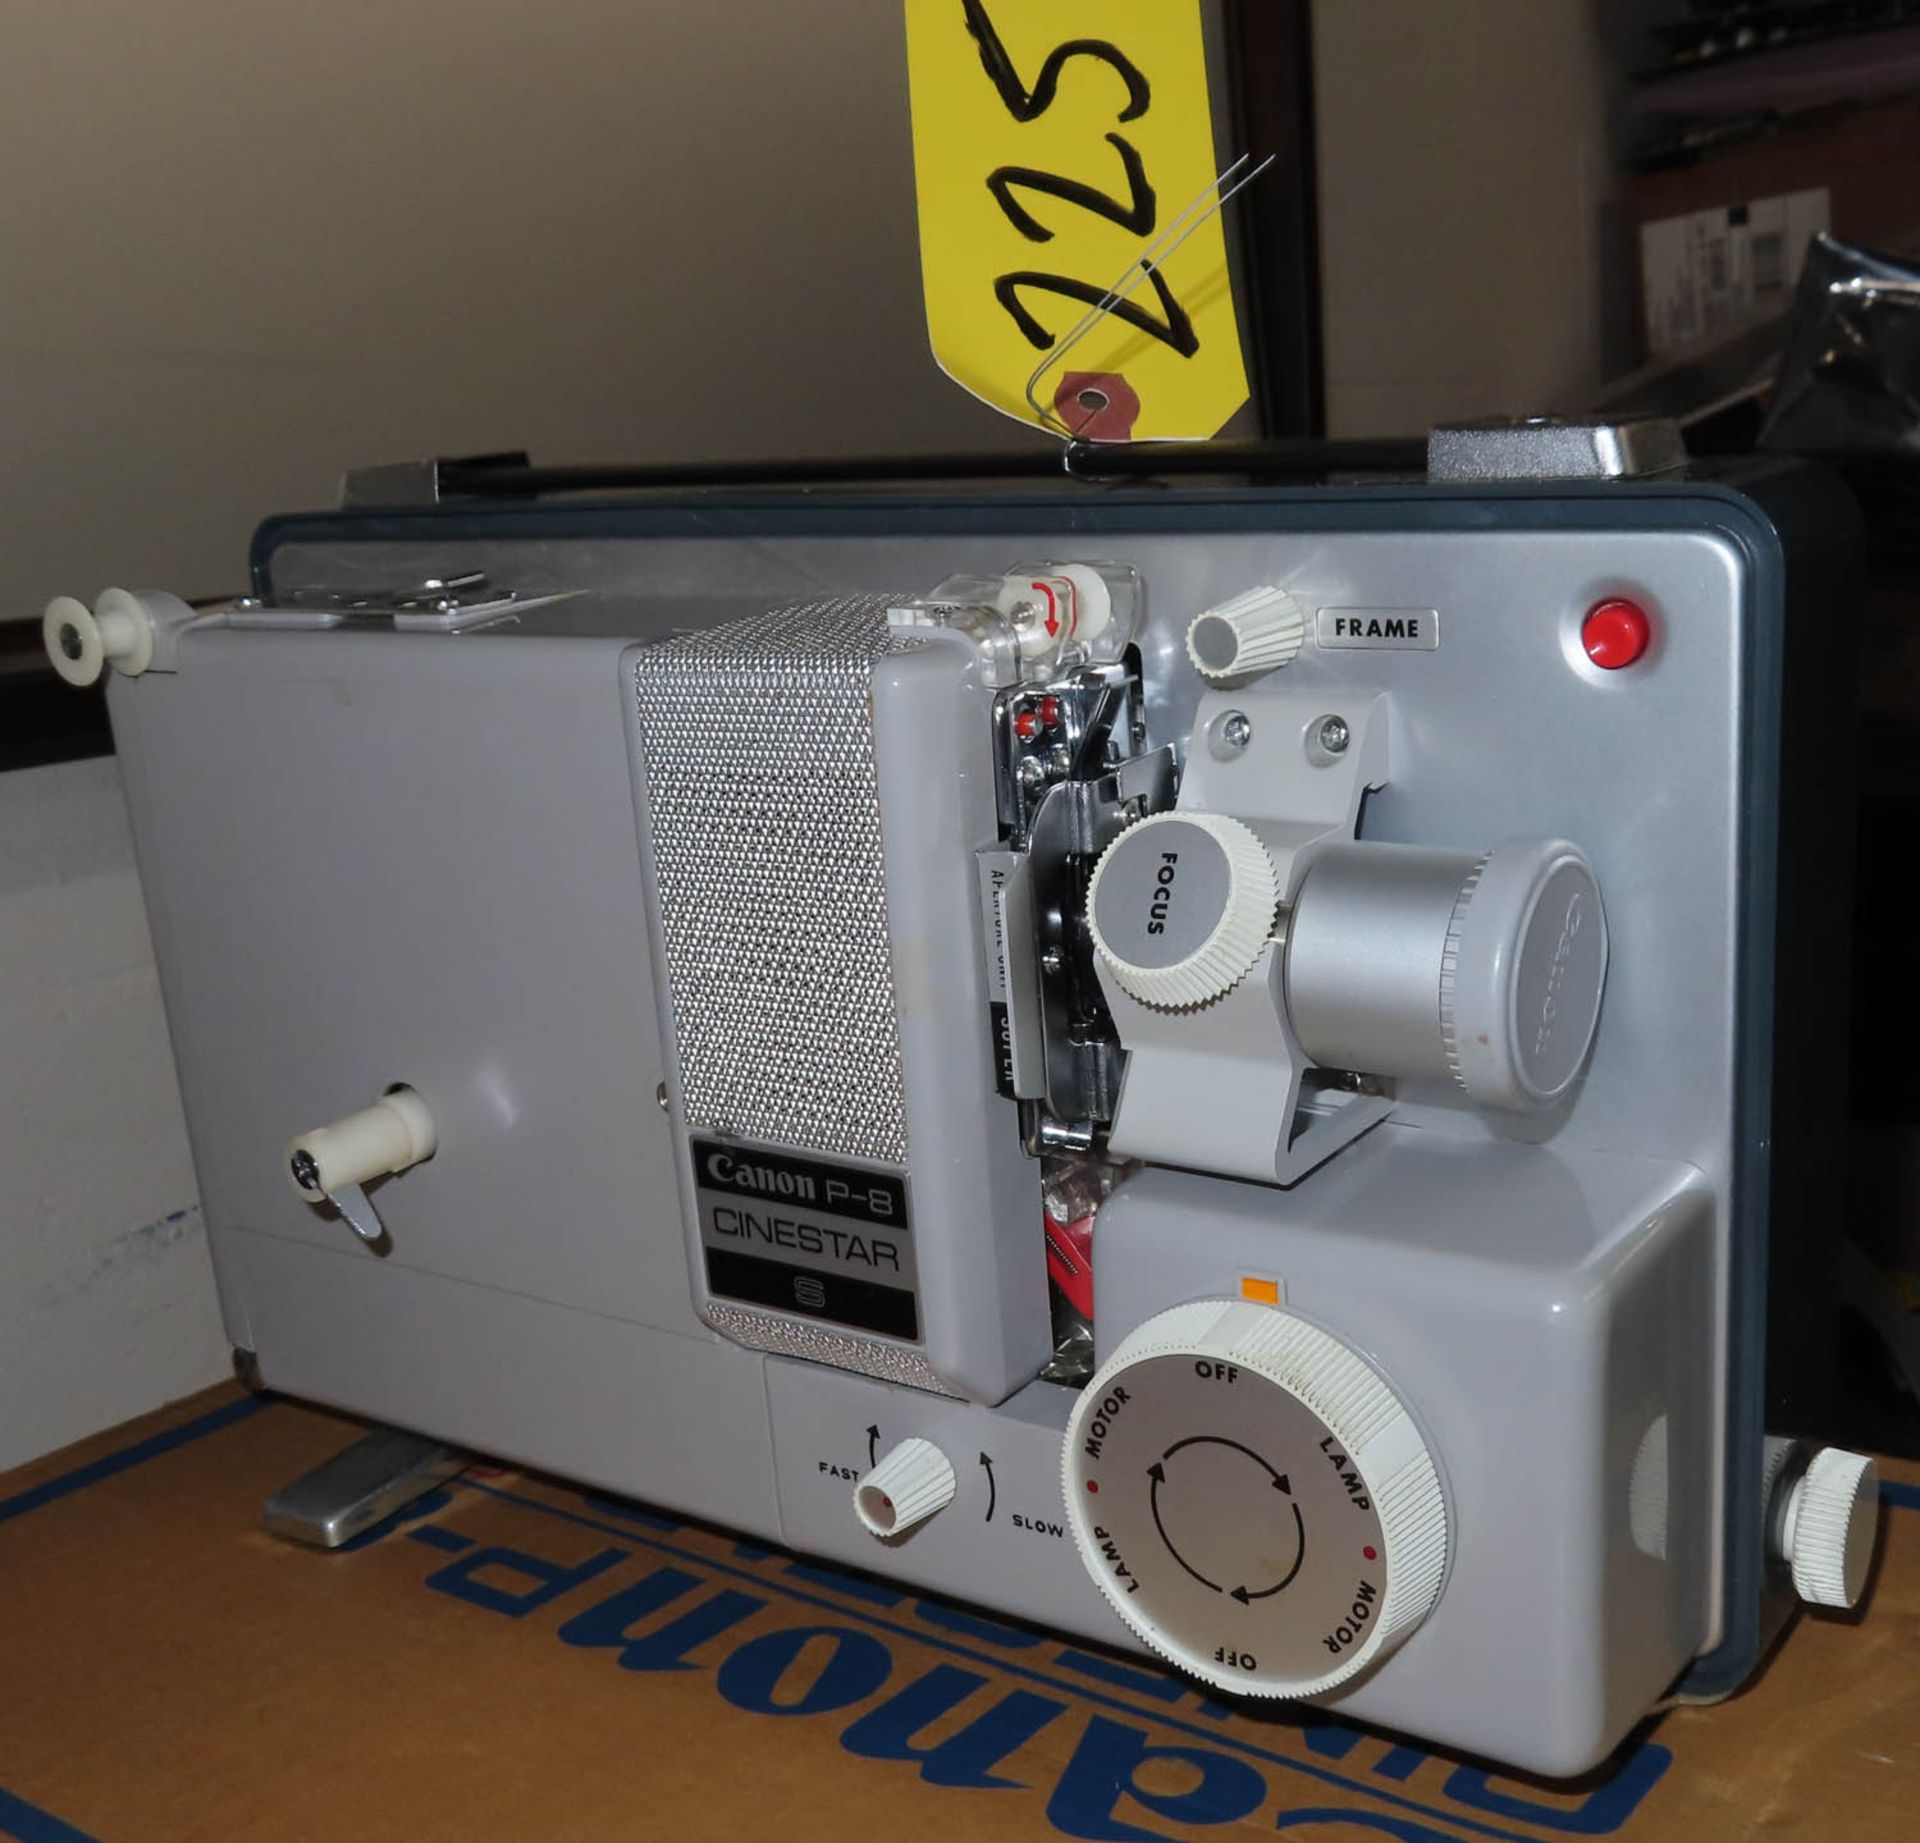 CINESTAR CANON MDL. P-8 8MM PROJECTOR - Image 2 of 2